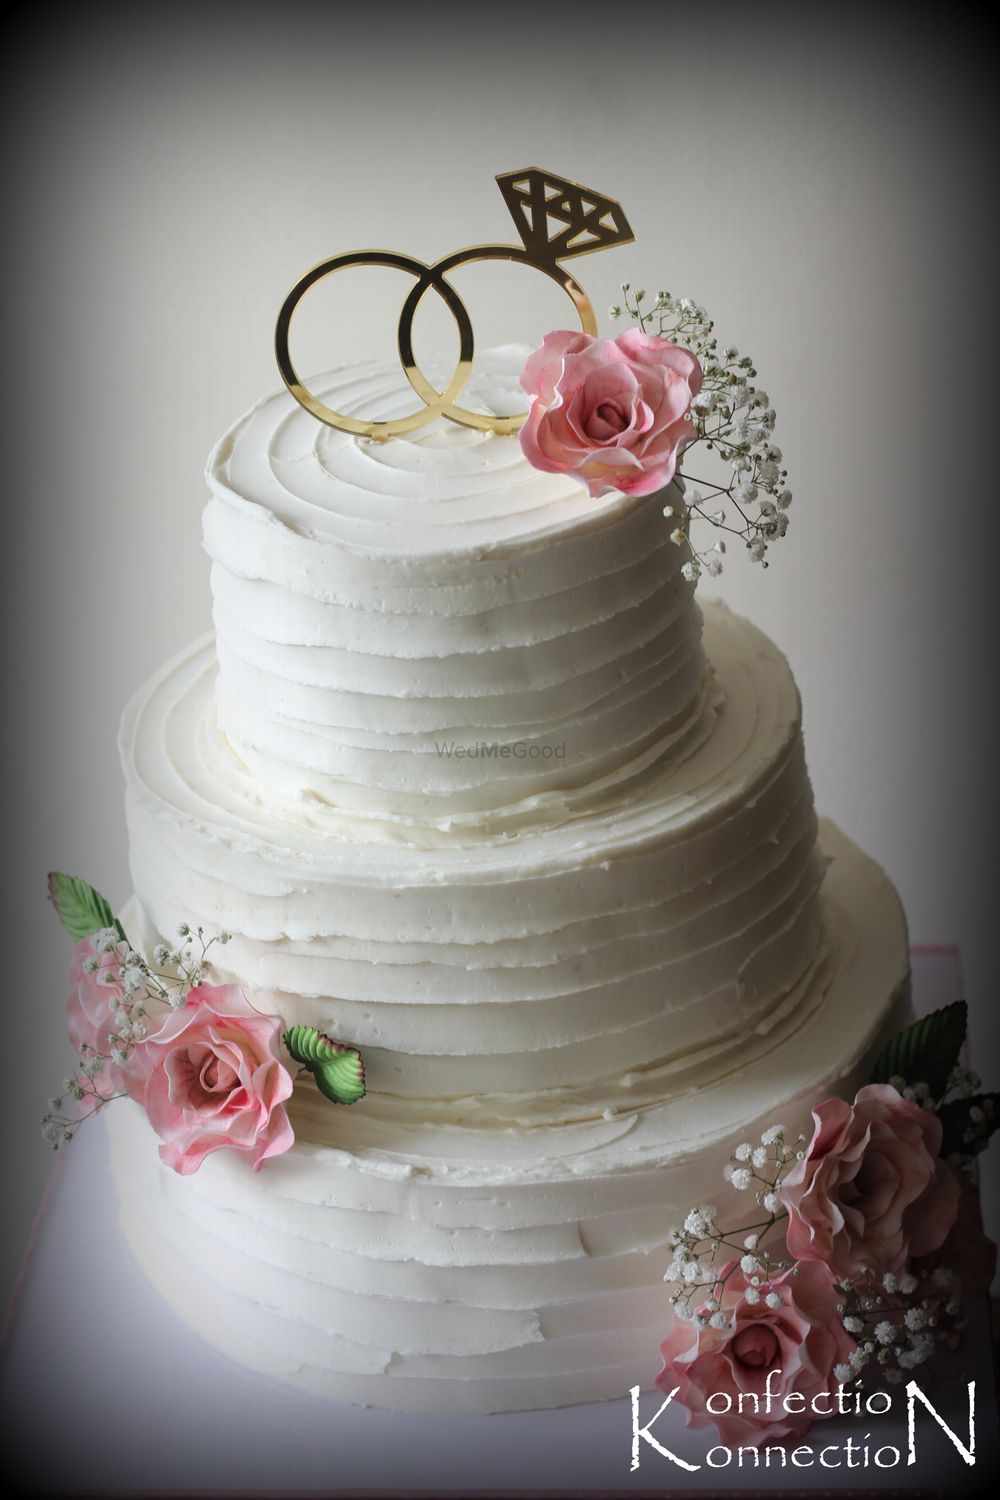 Photo From Wedding Cakes - By Konfection konnection